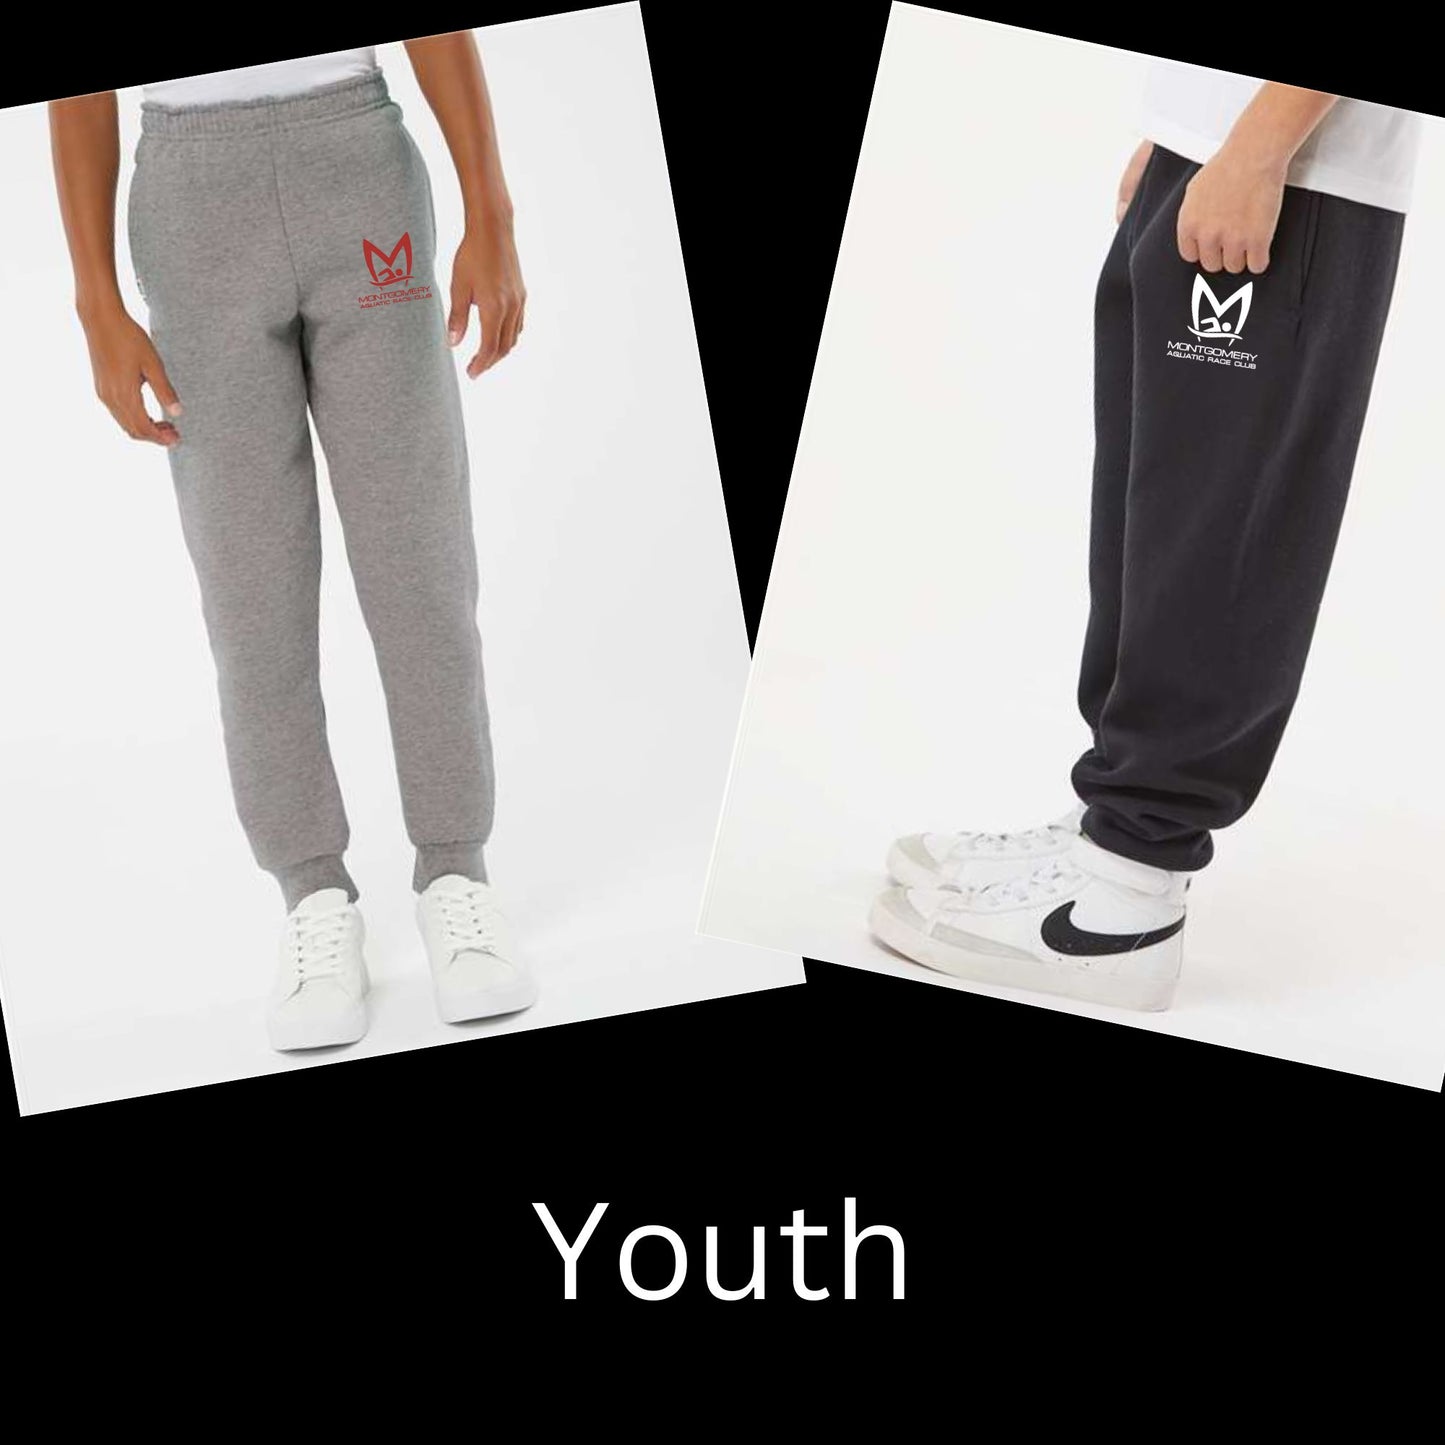 Youth or Adult MARC Sweatpants